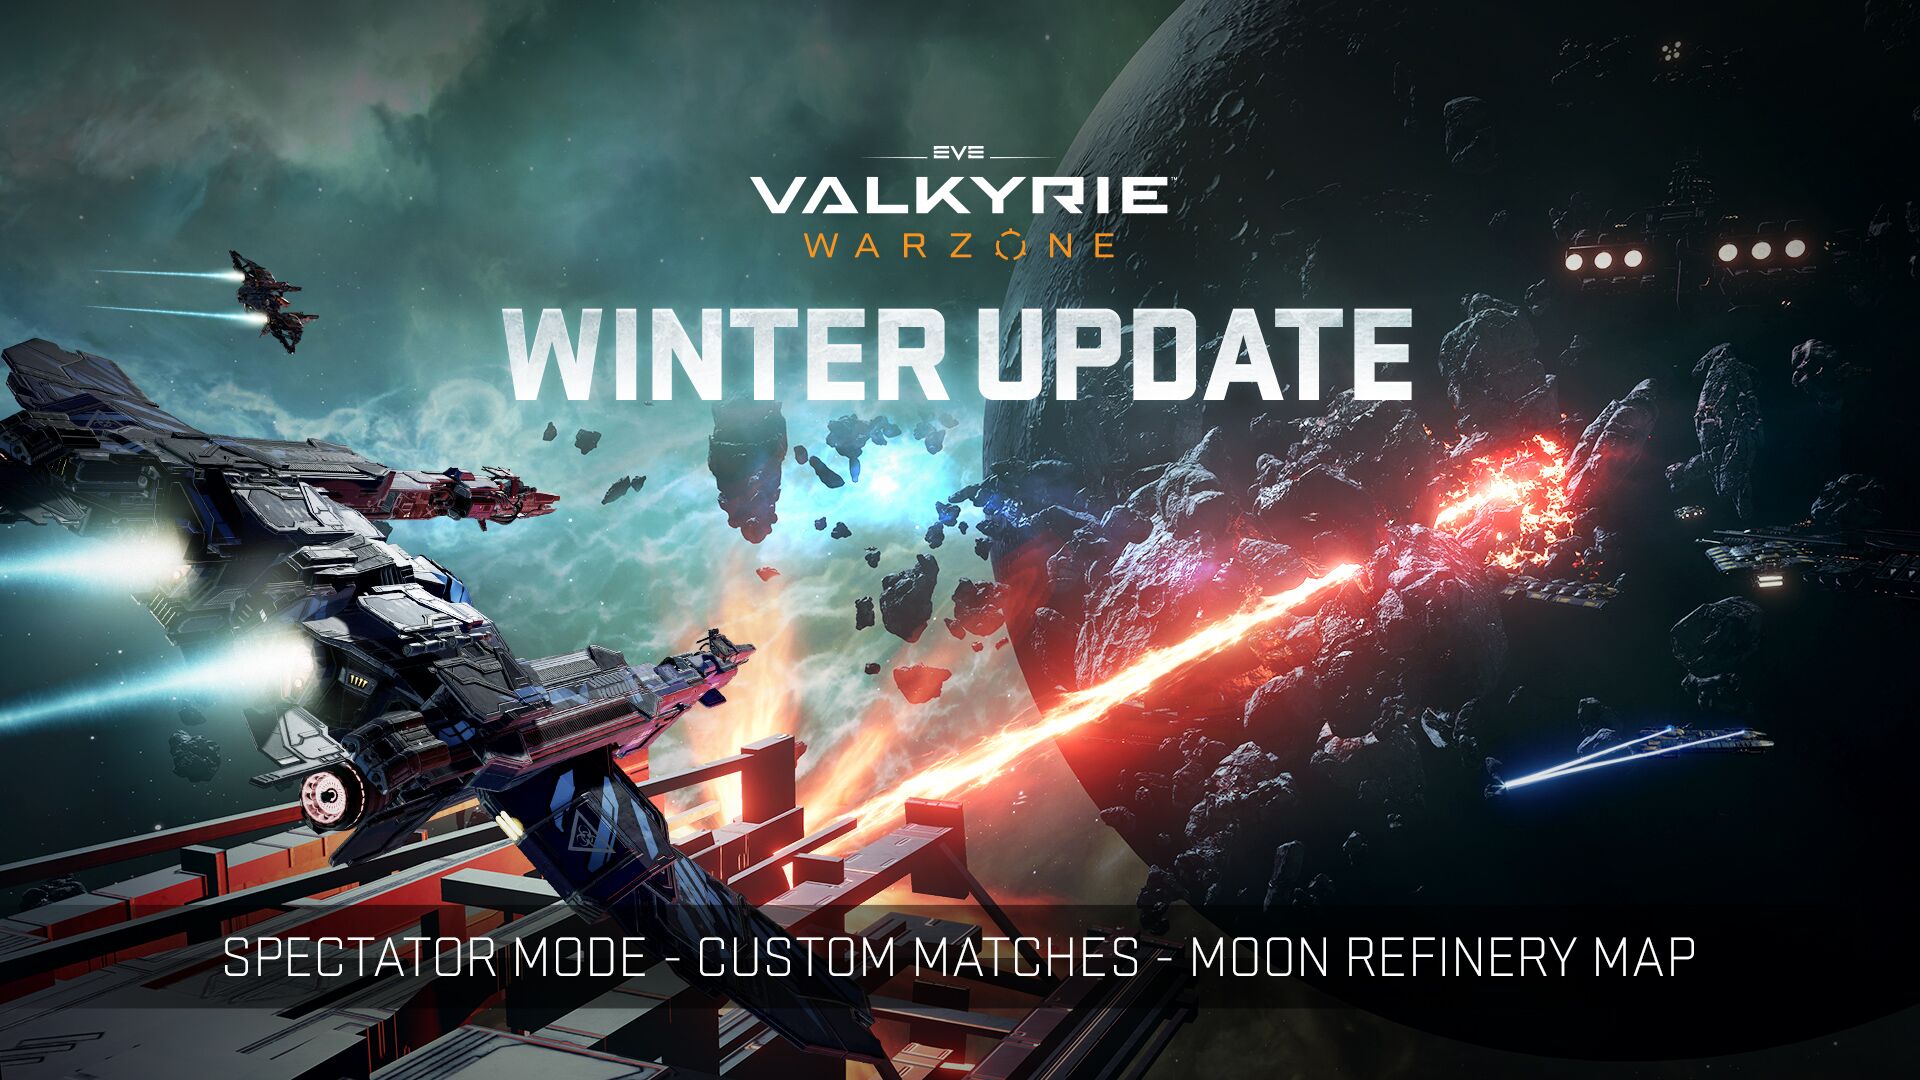 snigmord tyngdekraft At afsløre EVE: Valkyrie – Warzone's Player-Focused Winter Update Brings Holiday Cheer  - CCP Games